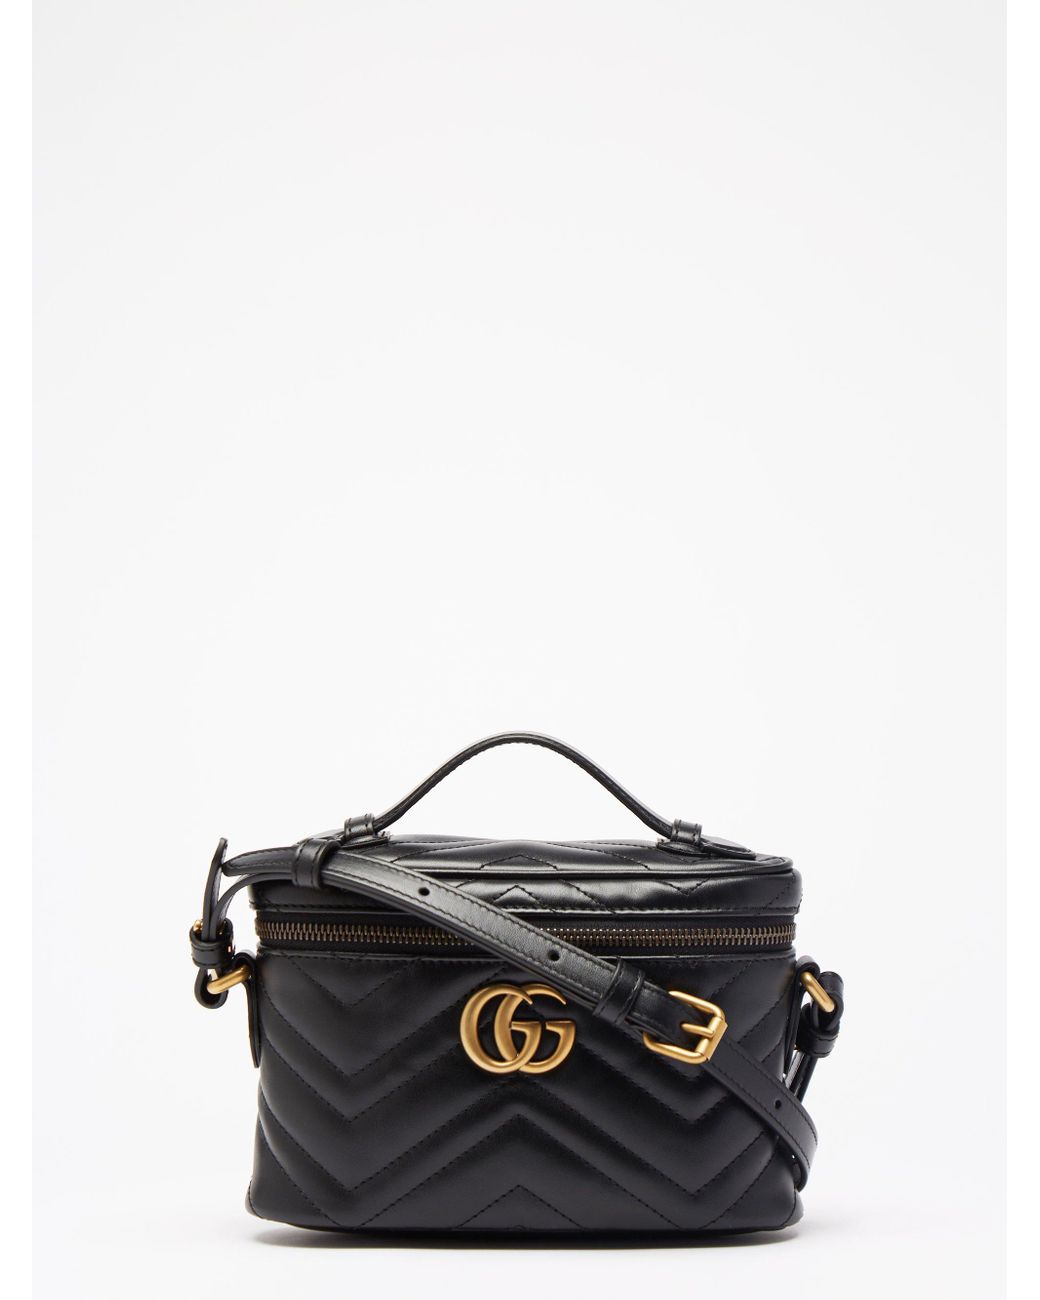 Gucci Gg Marmont Vanity Mini Leather Cross Body Bag In Black Lyst Canada